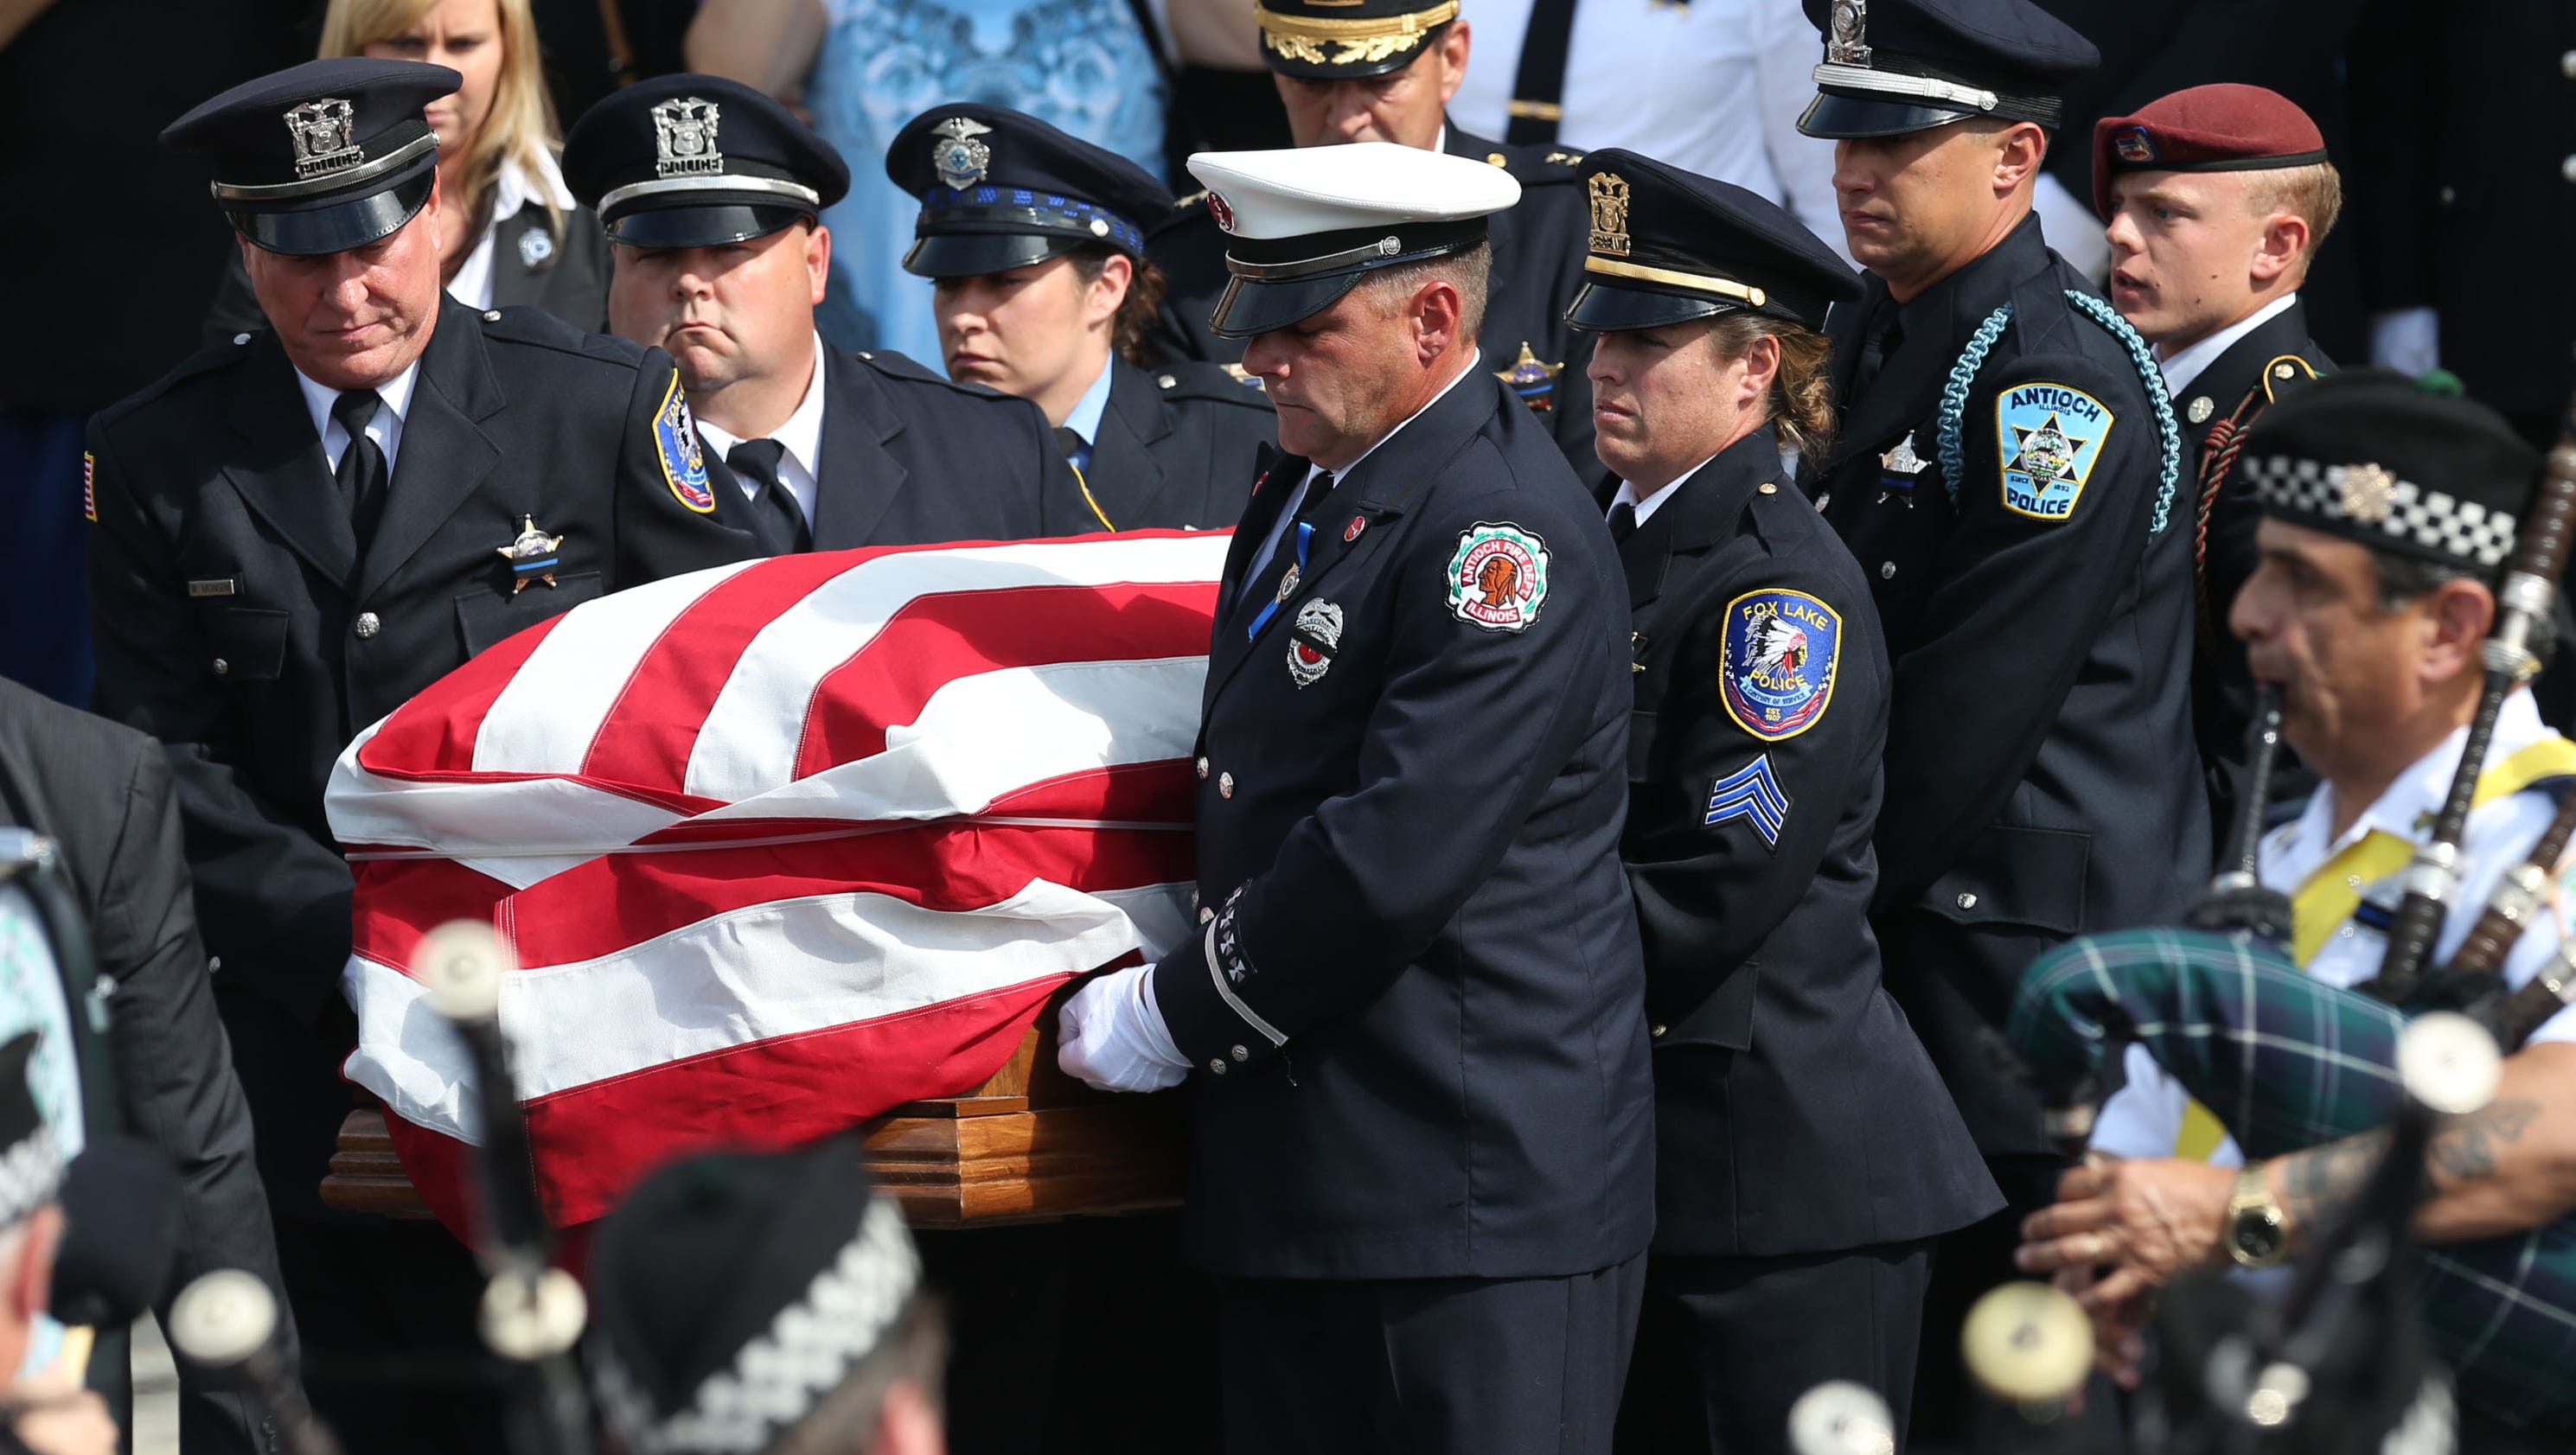 Funeral for slain police officer Lt. Charles Joseph Gliniewicz3200 x 1680